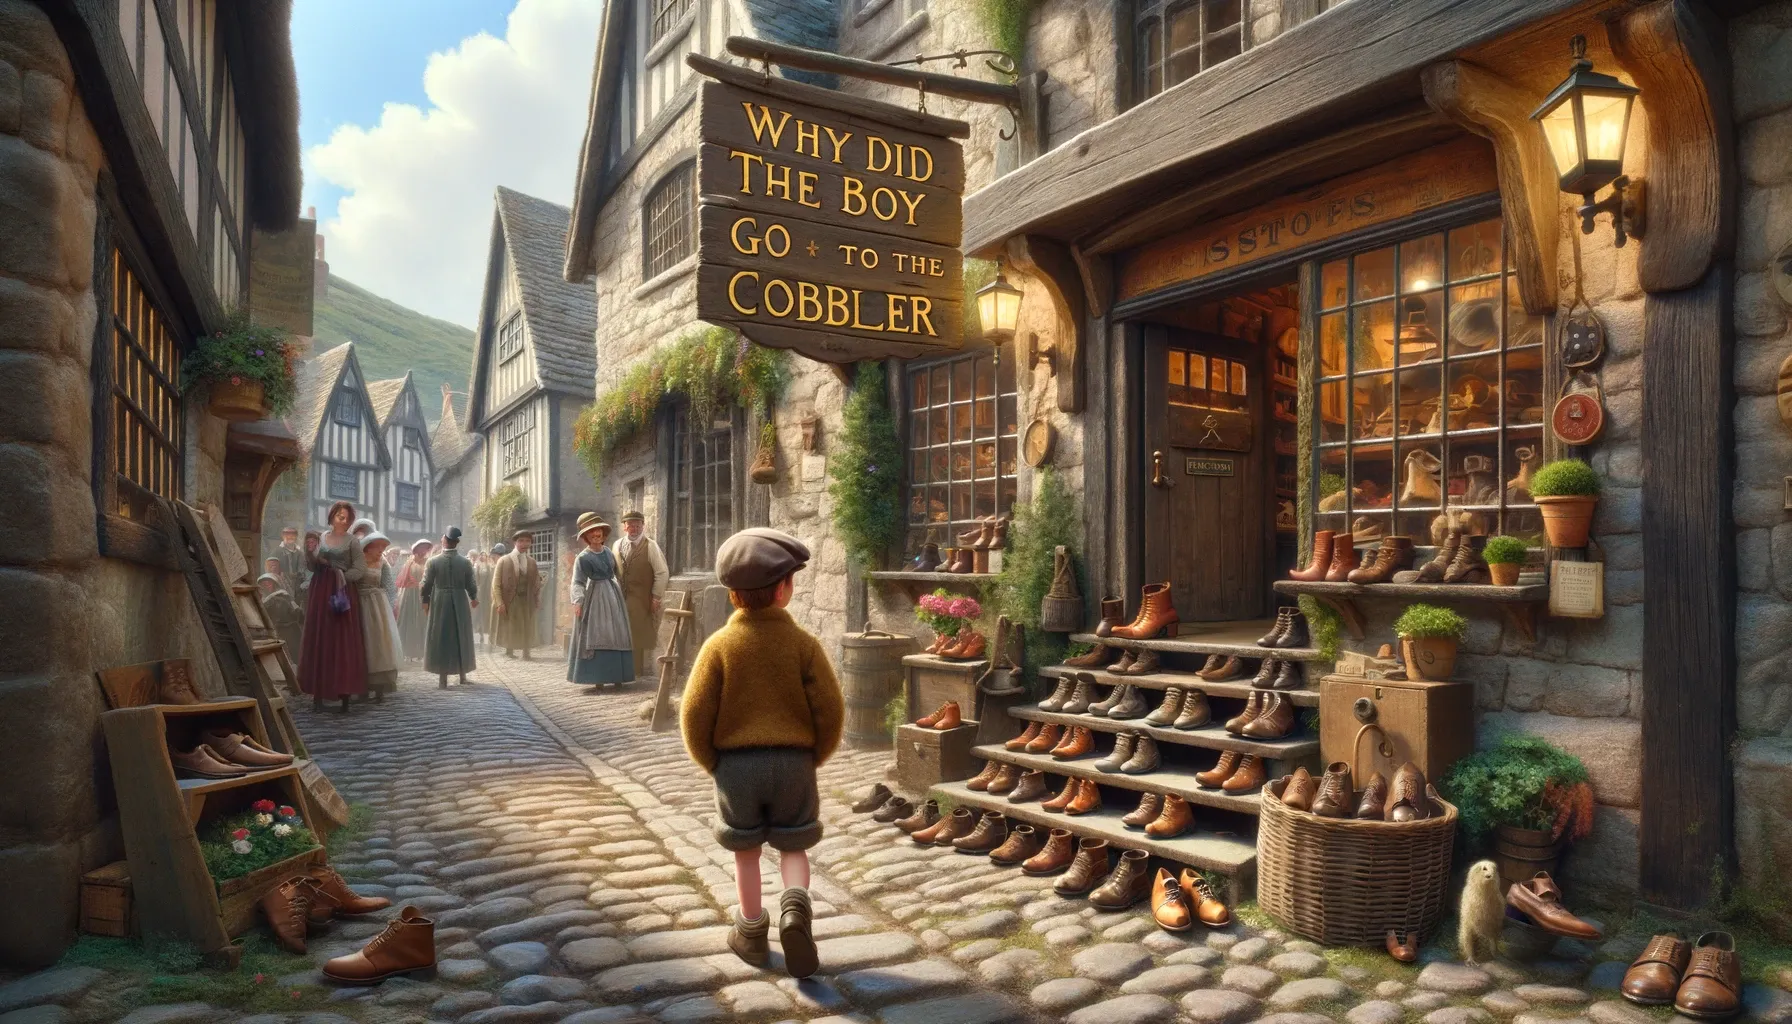 Why Did the Boy Go to the Cobbler